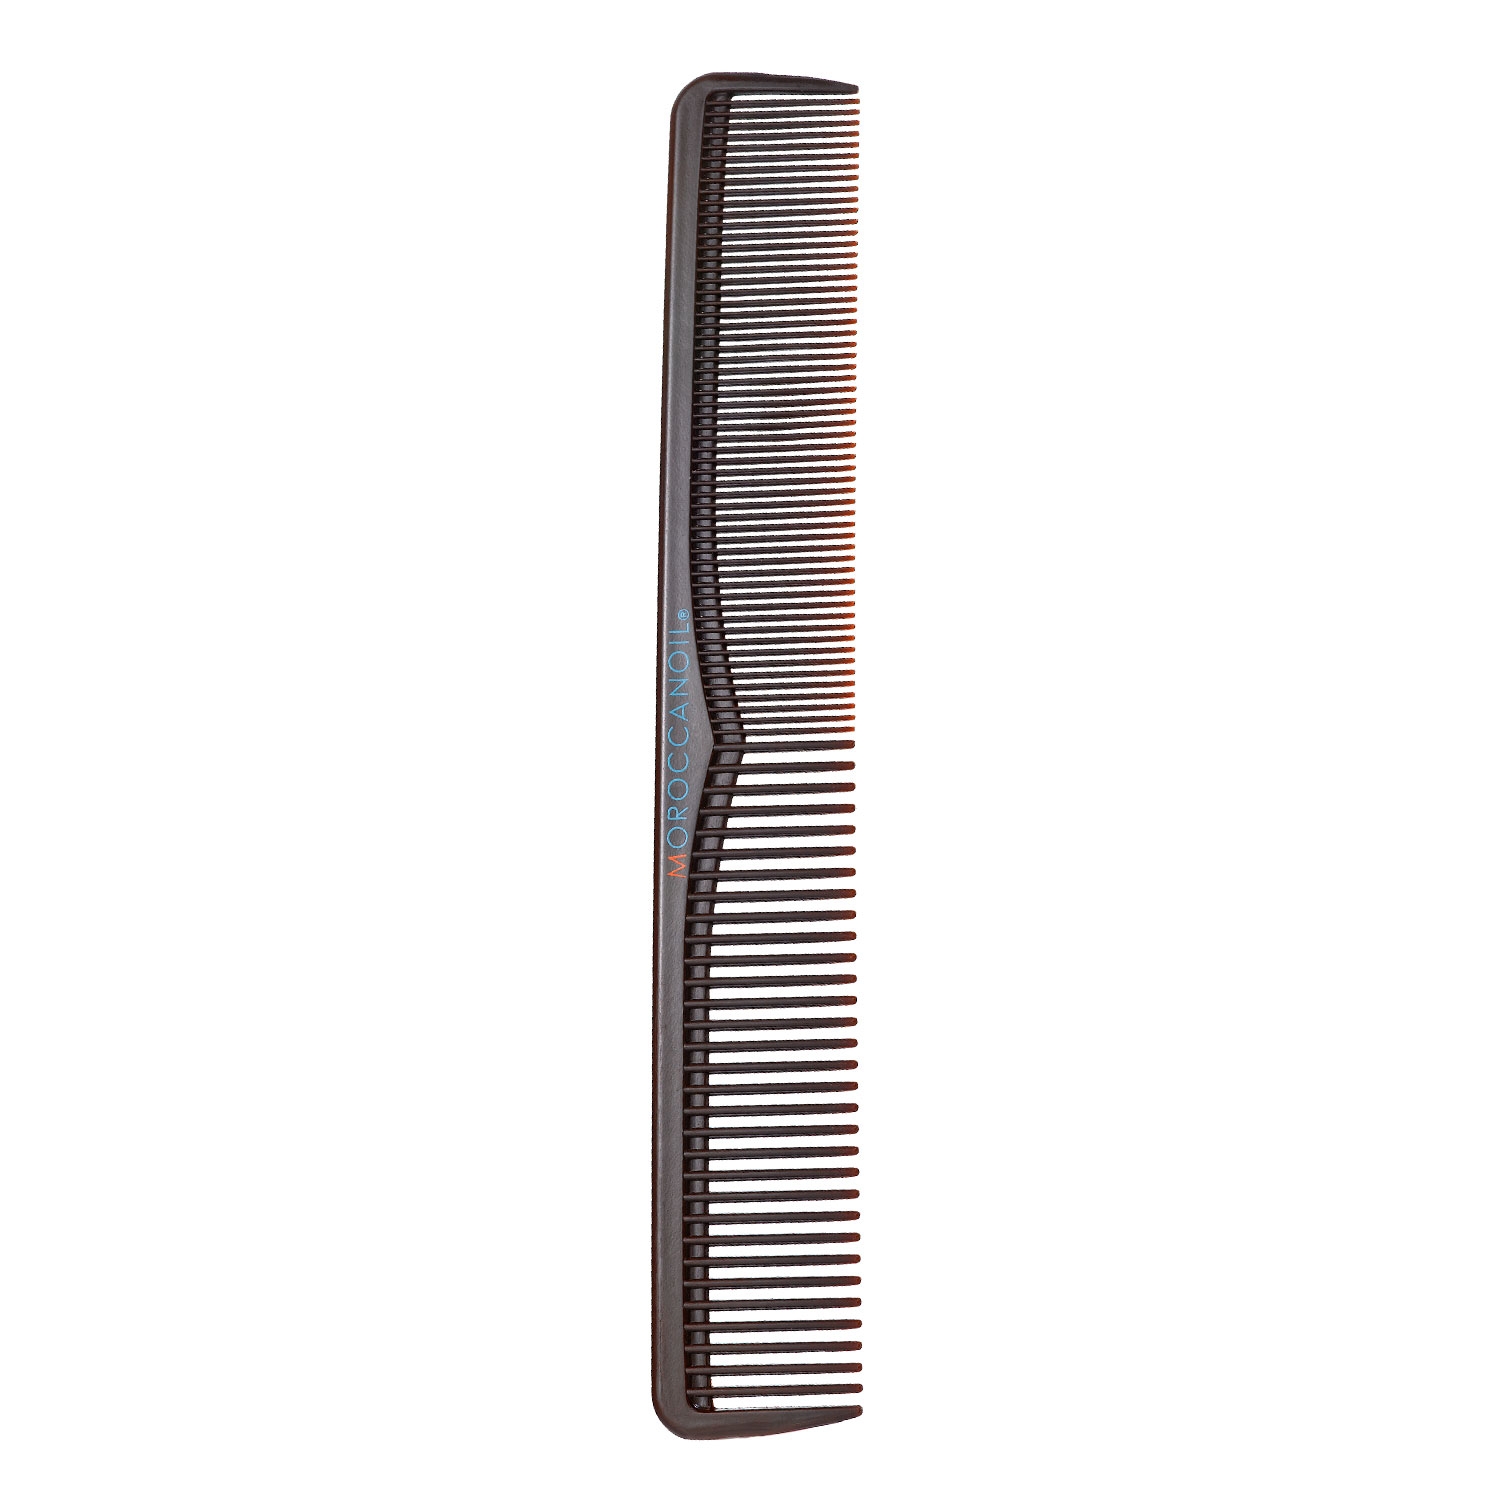 Product image from Moroccanoil - Styling Comb